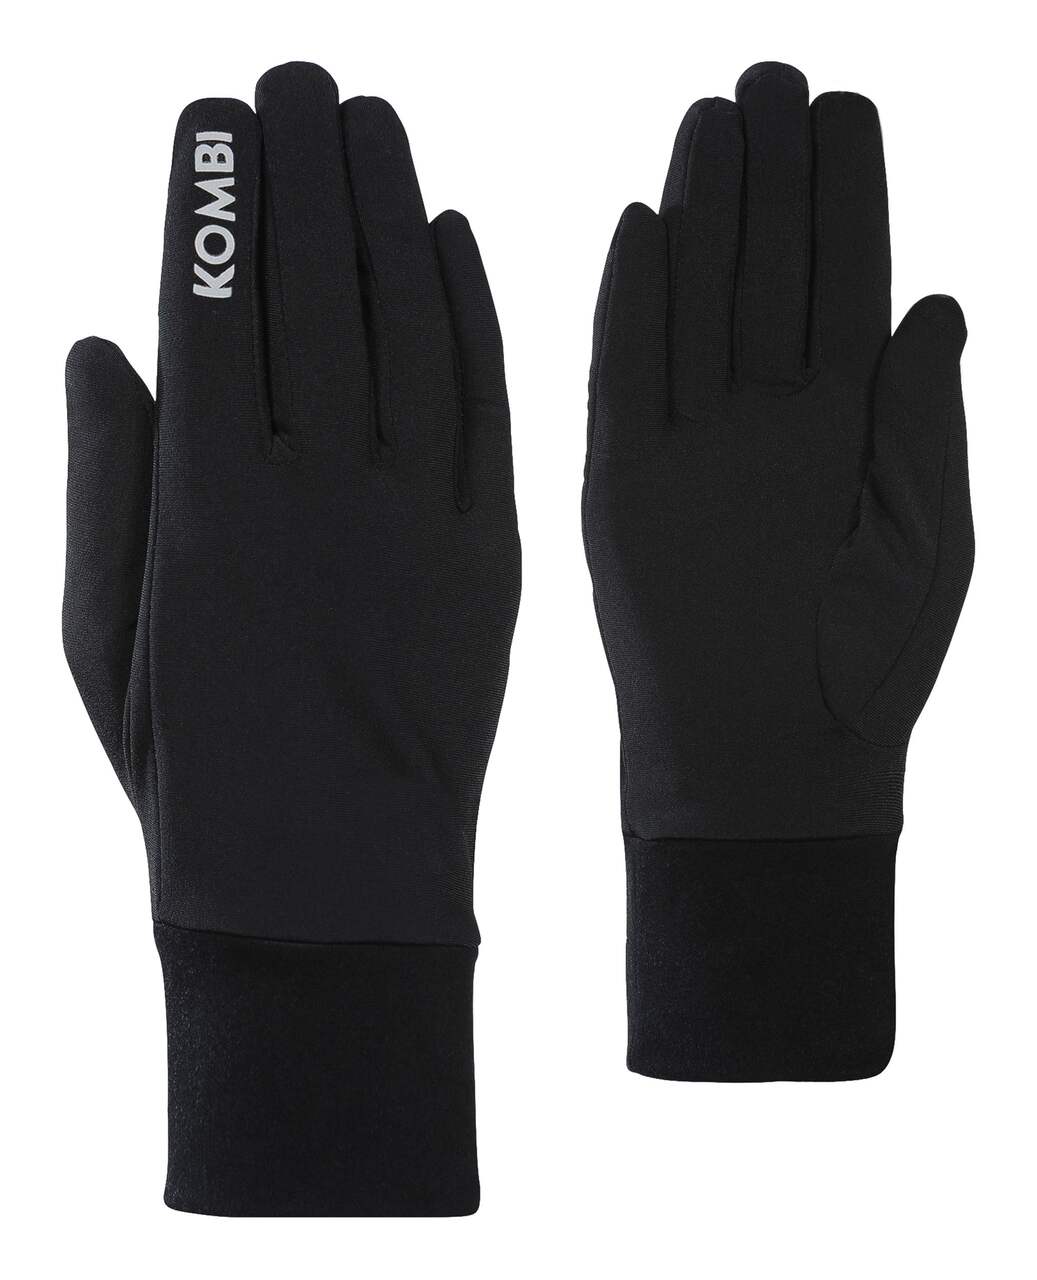 Hot Paws Women's Stretch Touch Screen Winter Casual Sport Gloves Warm  Waterproof, Black